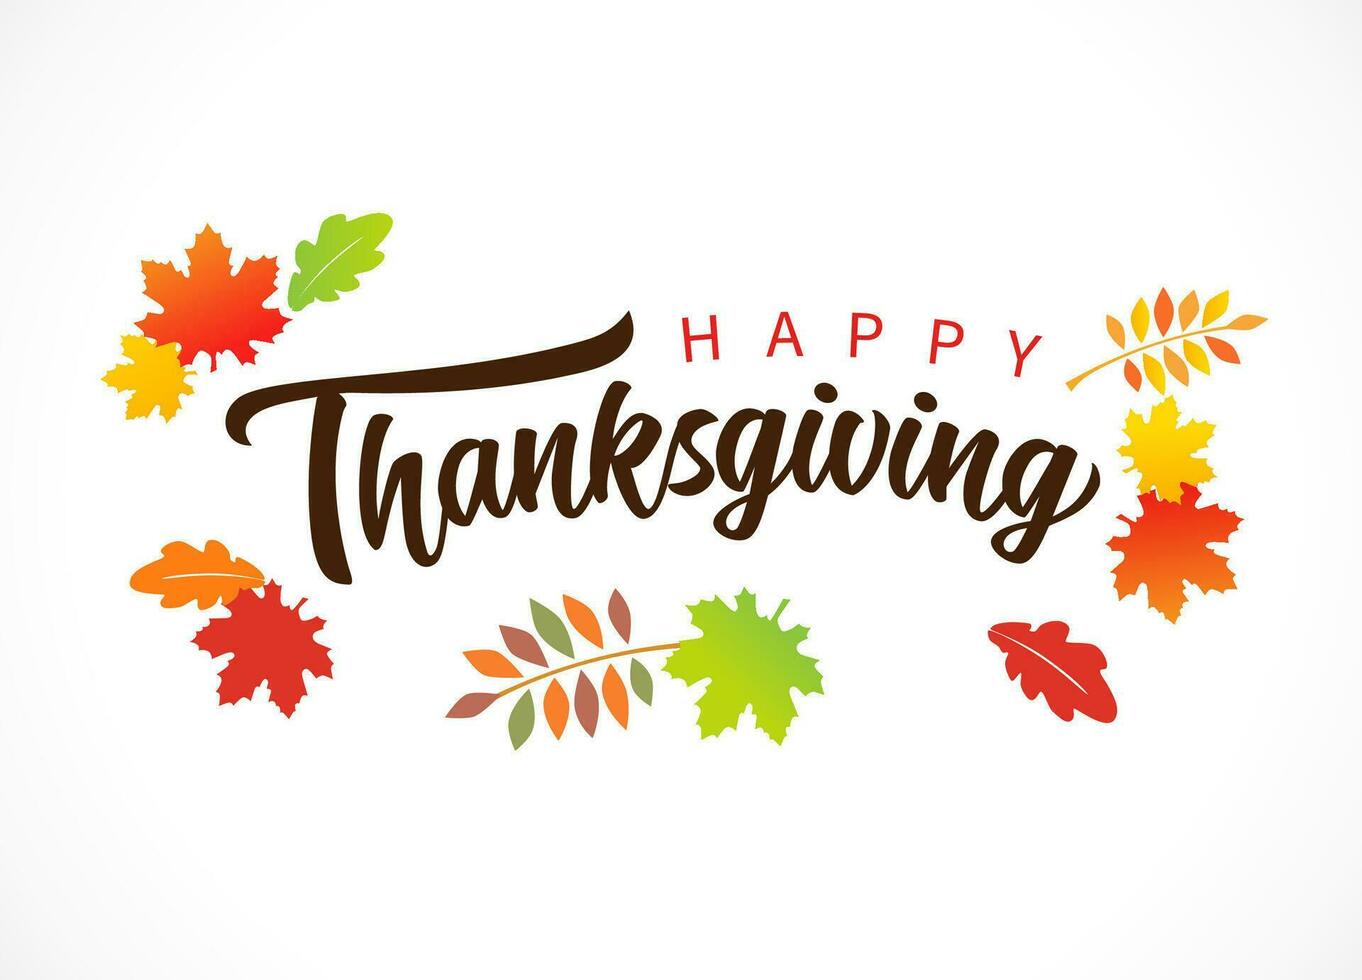 Happy Thanksgiving greeting card design vector